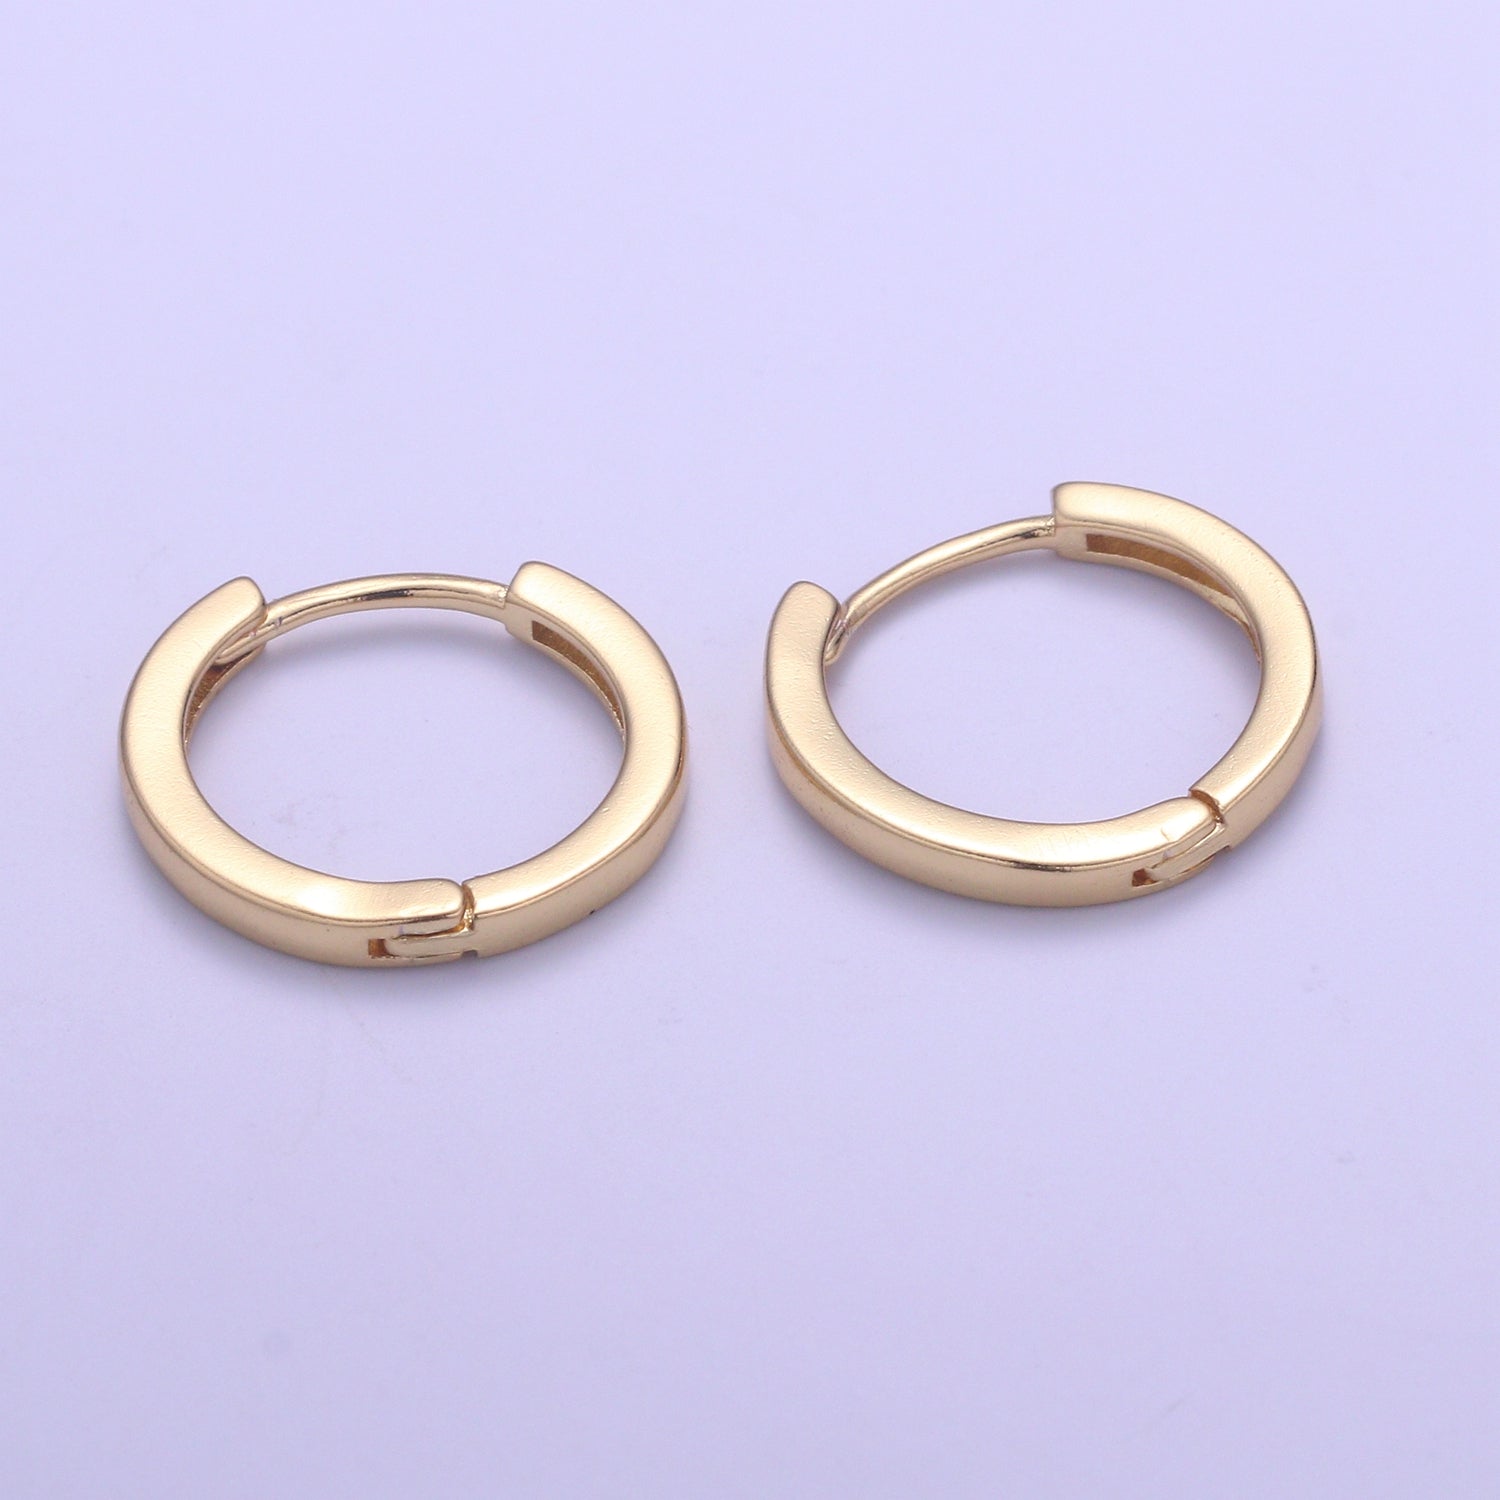 1pair 15x15.7 Simple Golden Mini Round Ring Huggies Earrings, Plain Gold Filled Tiny Geometric Shape Formal/Casual Daily Wear Earring Jewelry P077 - DLUXCA